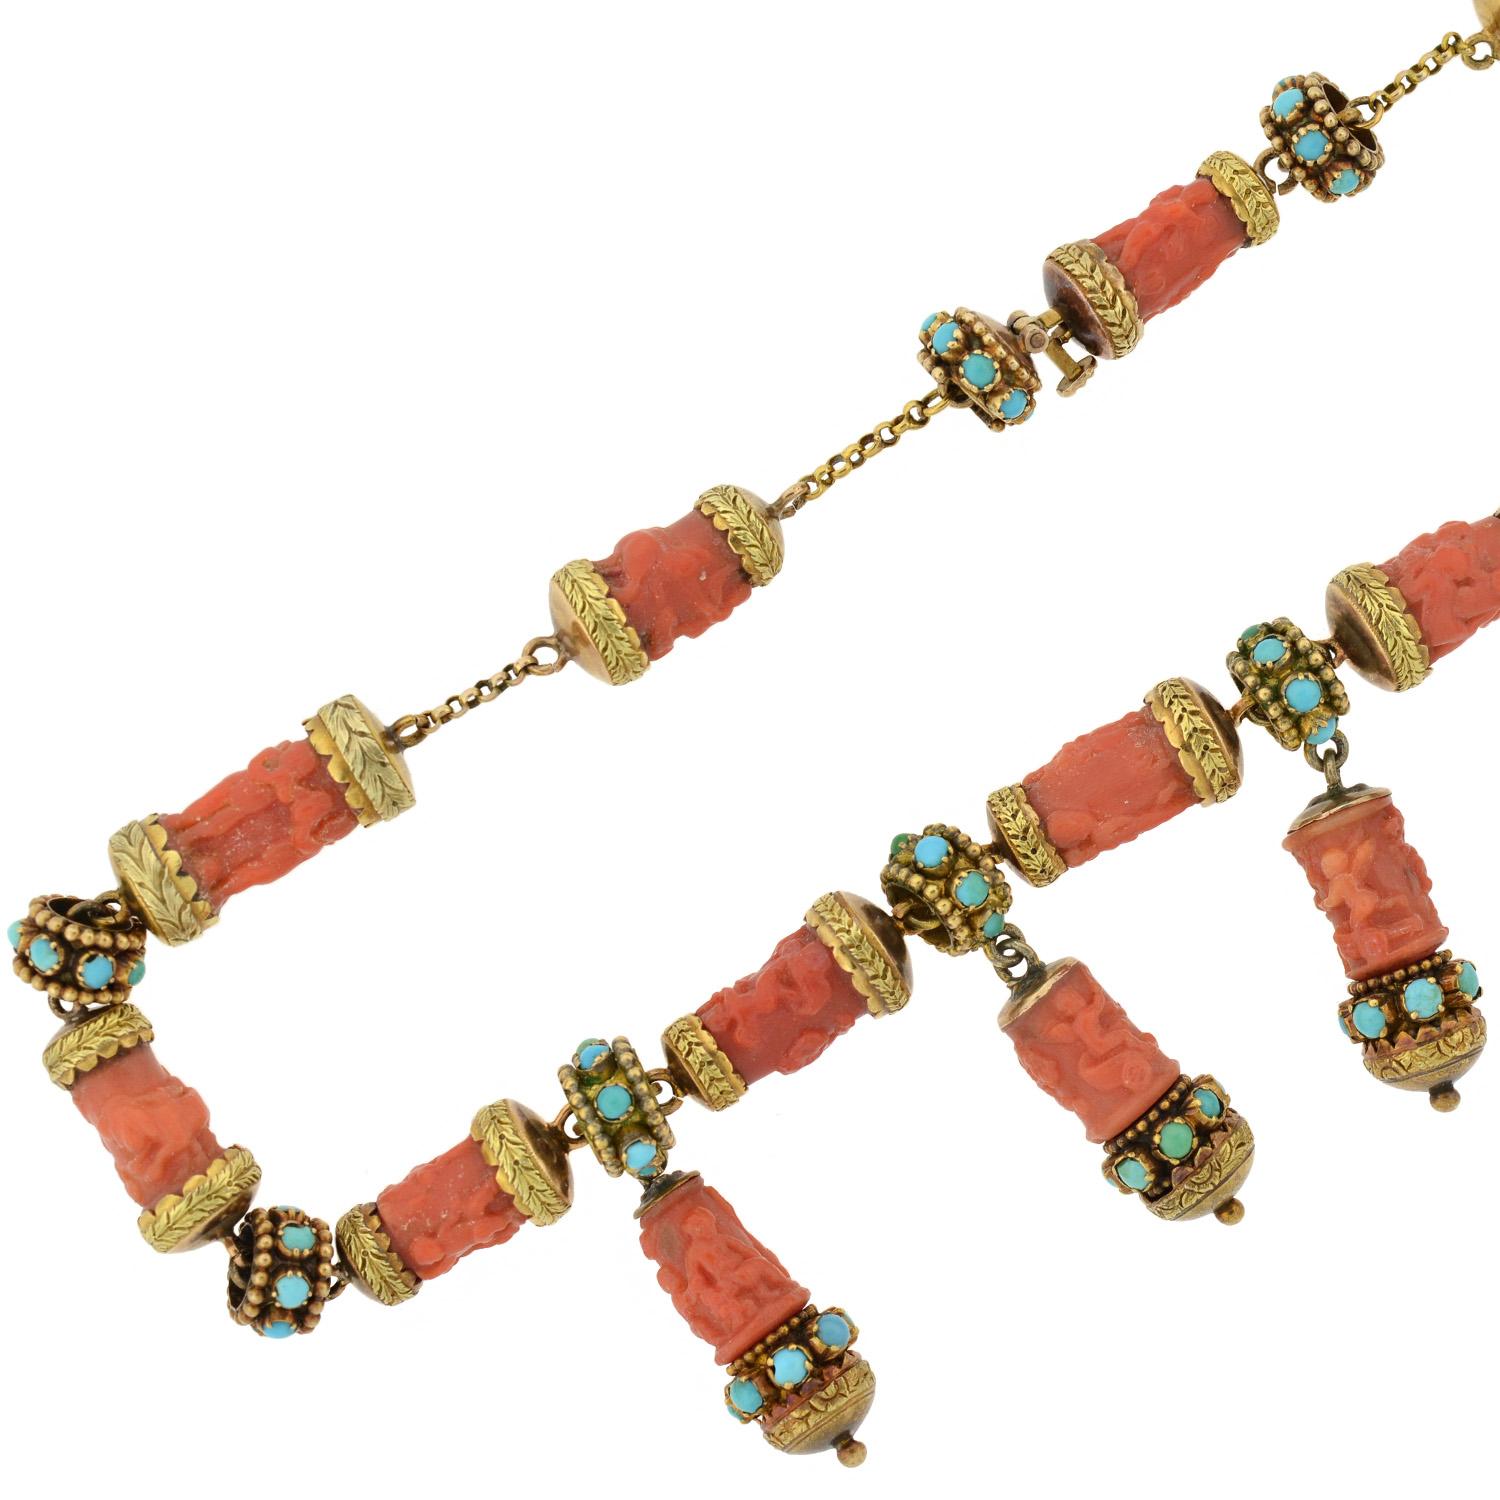 Women's Victorian Carved Natural Coral and Persian Turquoise Festoon Cherub Necklace